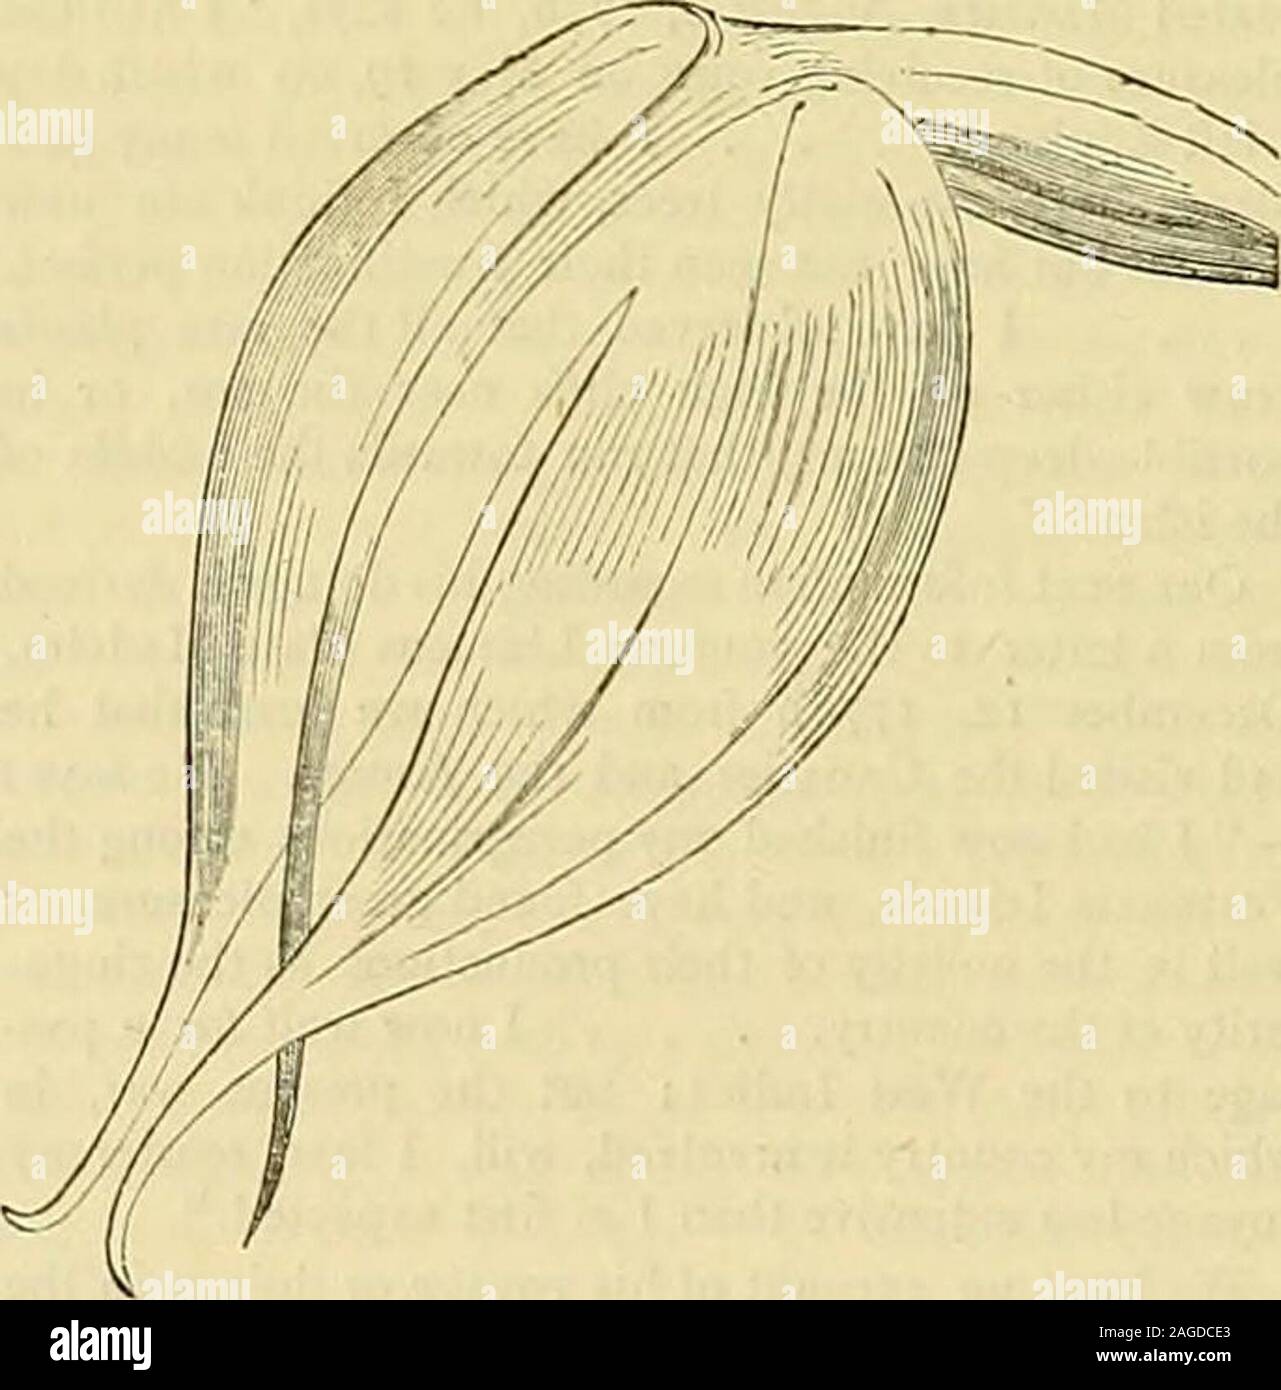 . The Gardeners' chronicle : a weekly illustrated journal of horticulture and allied subjects. S^ Fig. 6z.—masdevallia lindeni. Messrs. Low. This has a yellow-orange flower,and belongs to the polysticta group, its nearestally being M. trideus.M. leontoglossa, Rchb. f., Bonplandia, iii., p. 69 ;Walp. Ann. vi., p. 191 ; Gard. Chro/i., n,s., xv.,p. 234.—New Grenada, First discovered by. S3- Fig, 63.—masdevallia rosea (see p. 337). Hermann Wagener. Cultivated by Mr. E. Wright, Gravelly Hill, near Birmingham.{M. lilacina : a name in Mr. Bulls Catalogue for i£8o.)M. Lindeni, Andre, ///. Hori. 1S70, Stock Photo